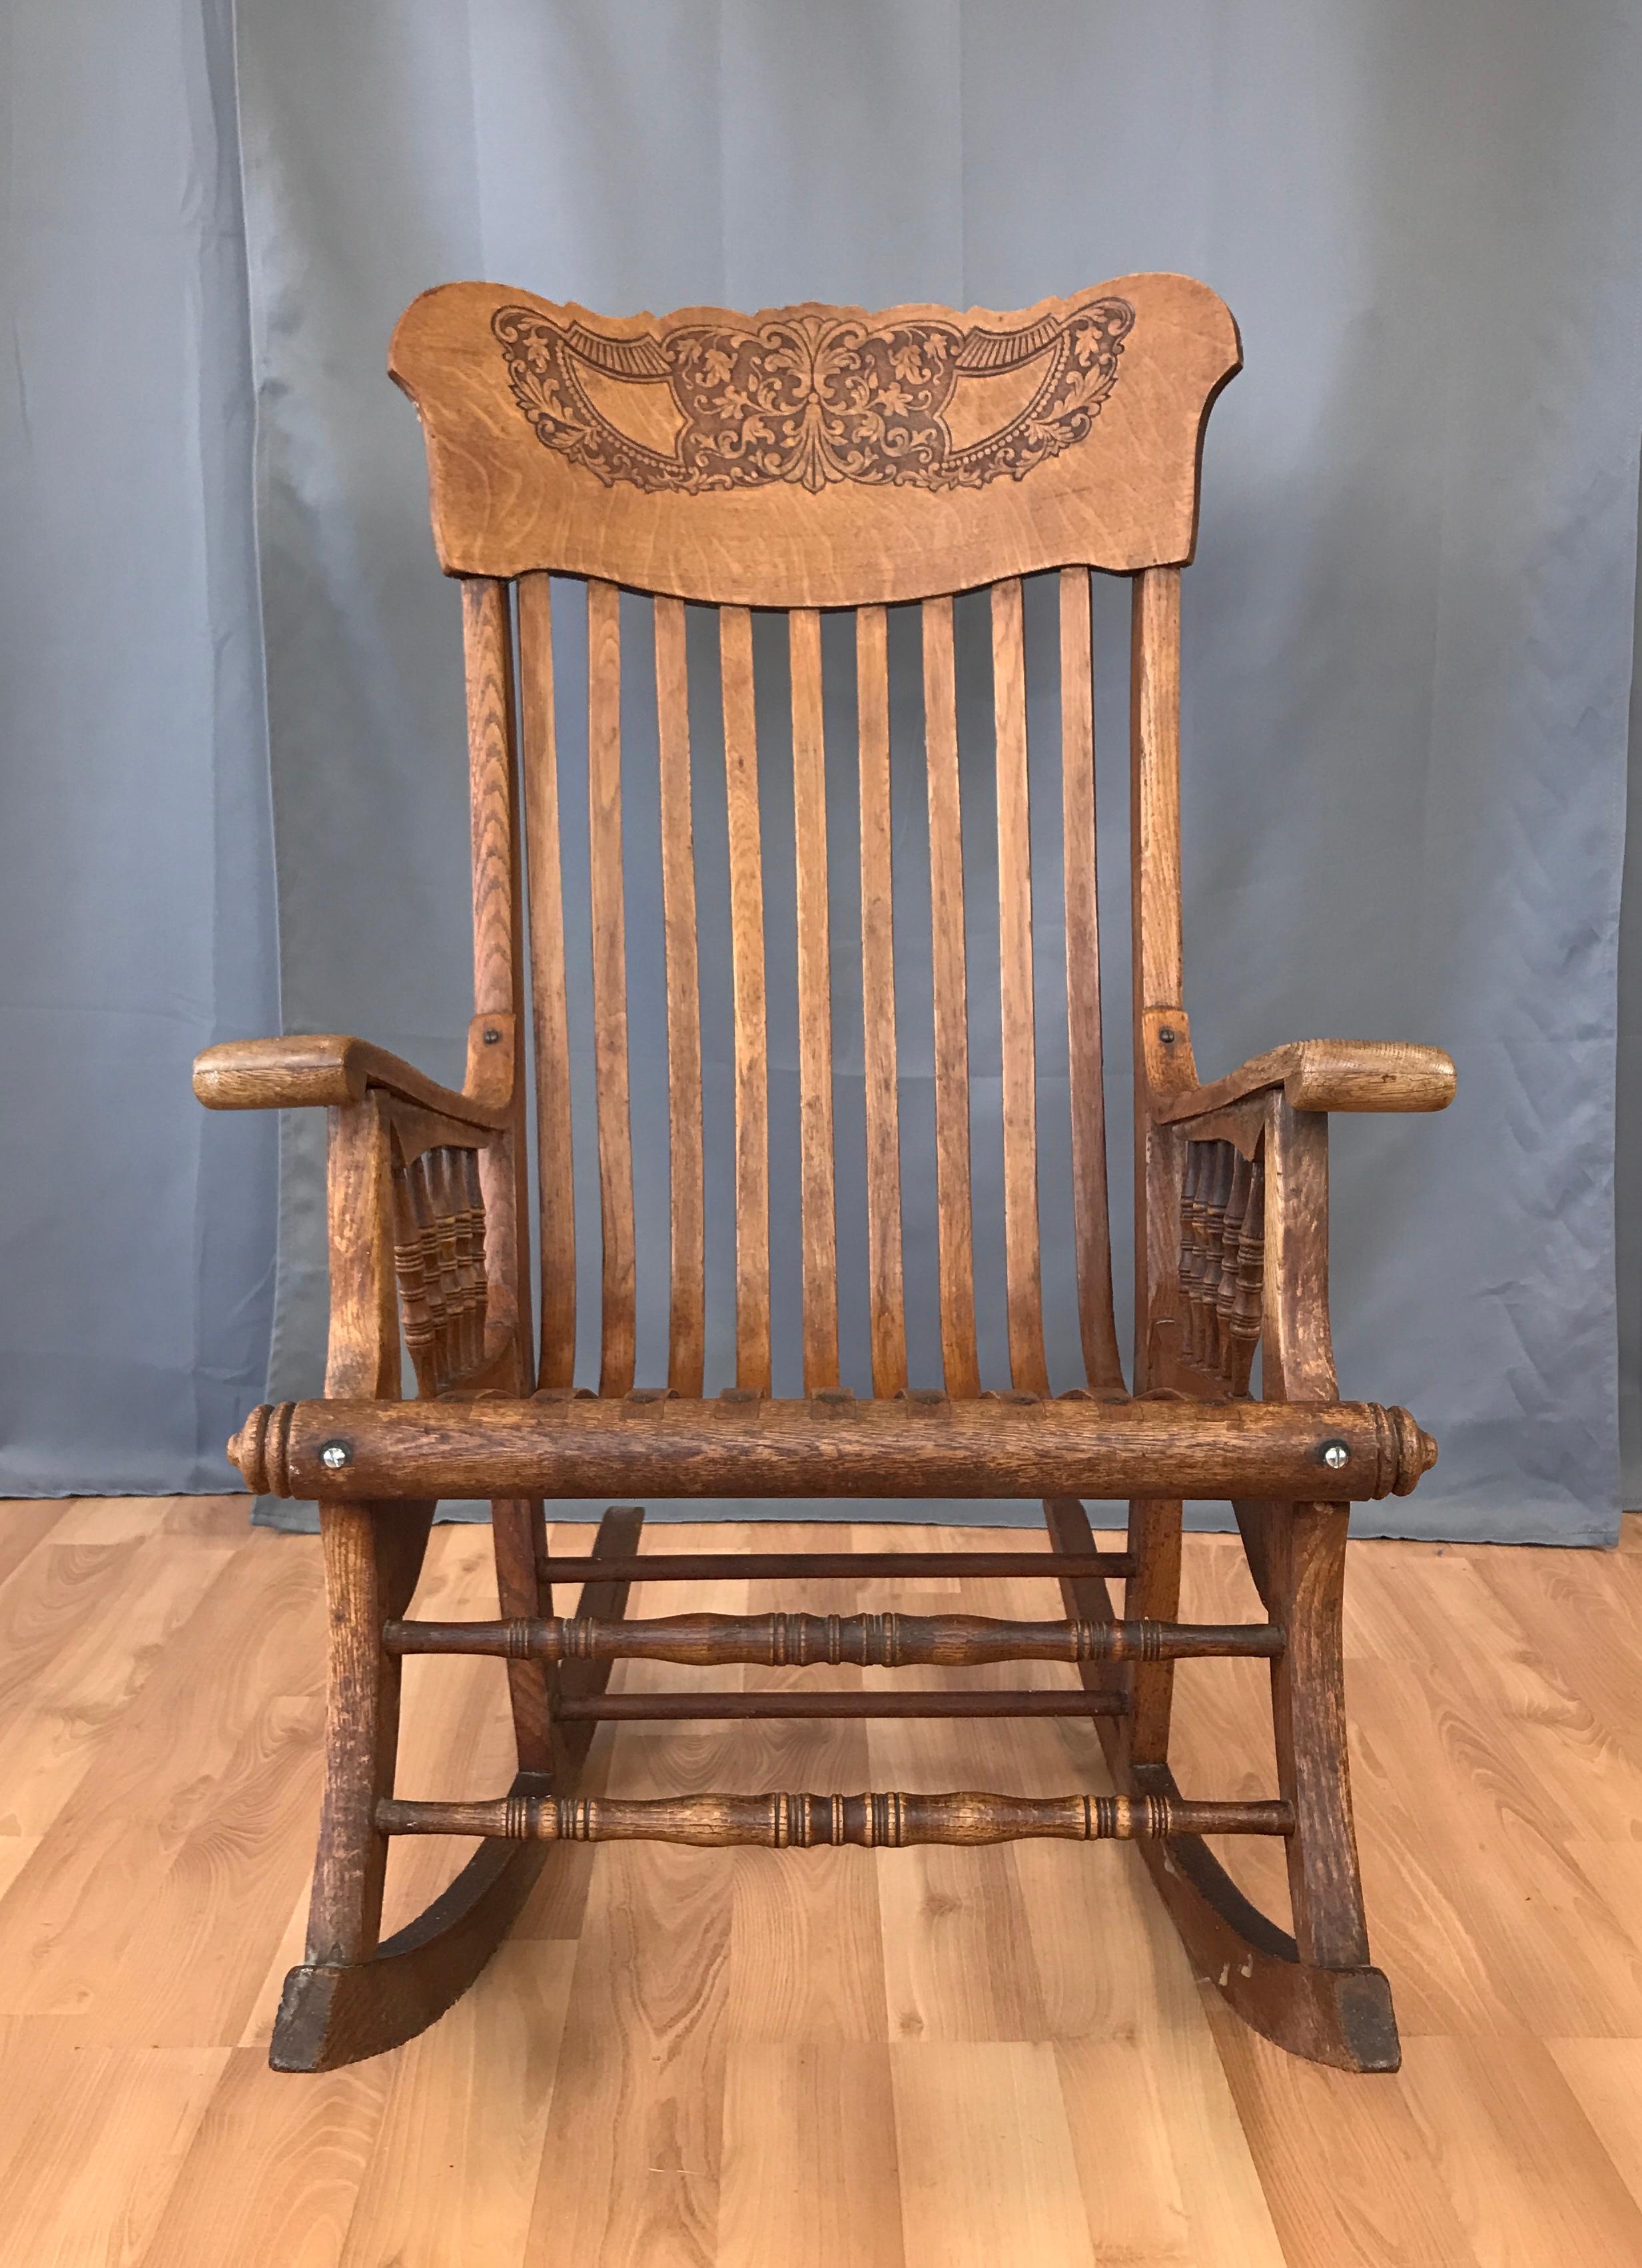 Unusual early 20th century rocking chair is solid oak. It features Victorian style spindles and bent quarter sawn oak head rest with a leaf motif. The seat and back is comprised of bent oak slats that attach to the frame with brass hardware. Well